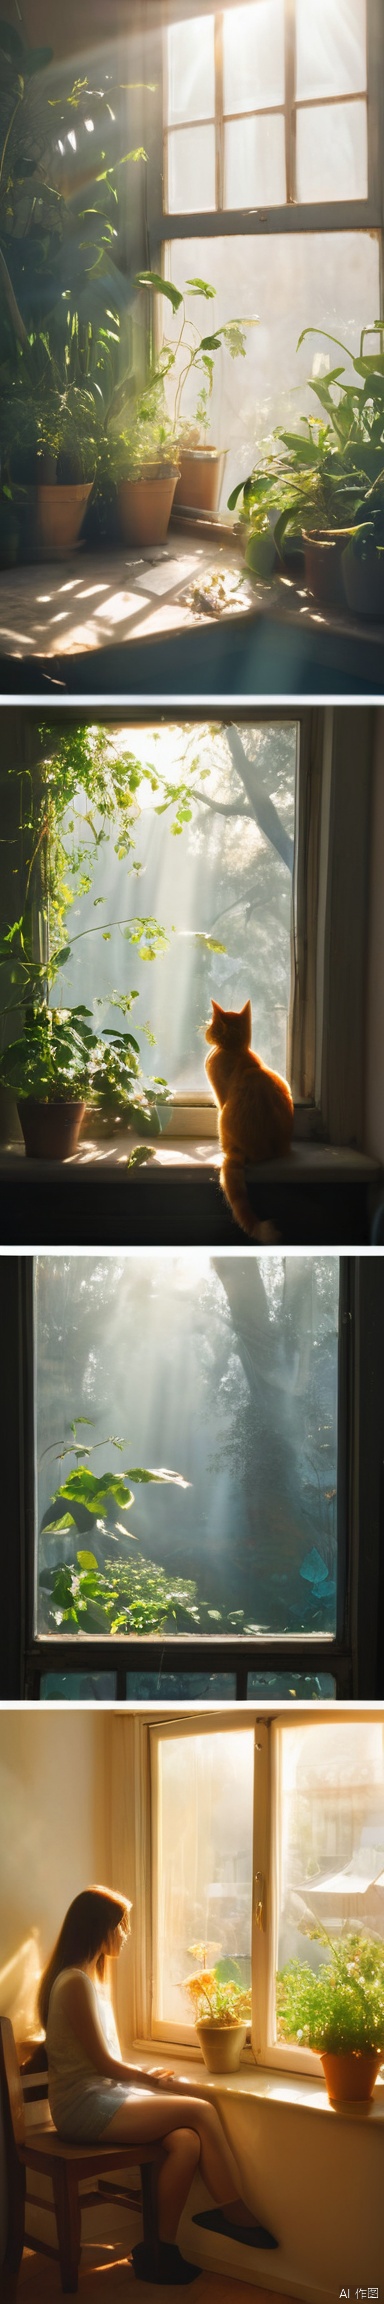 comic,a girl sitting in the sunny room looking at outside, surrounded by lush plants, exuding vitality. Sunlight streamed through the glass windows, falling onto the wooden furniture, creating a warm and cozy atmosphere. She gazed calmly out the window, a peaceful and joyful smile playing on her face,pet cat, from below,from_behind ,cold theme,light and shadow, bokeh,foggy,by Roger Dean,